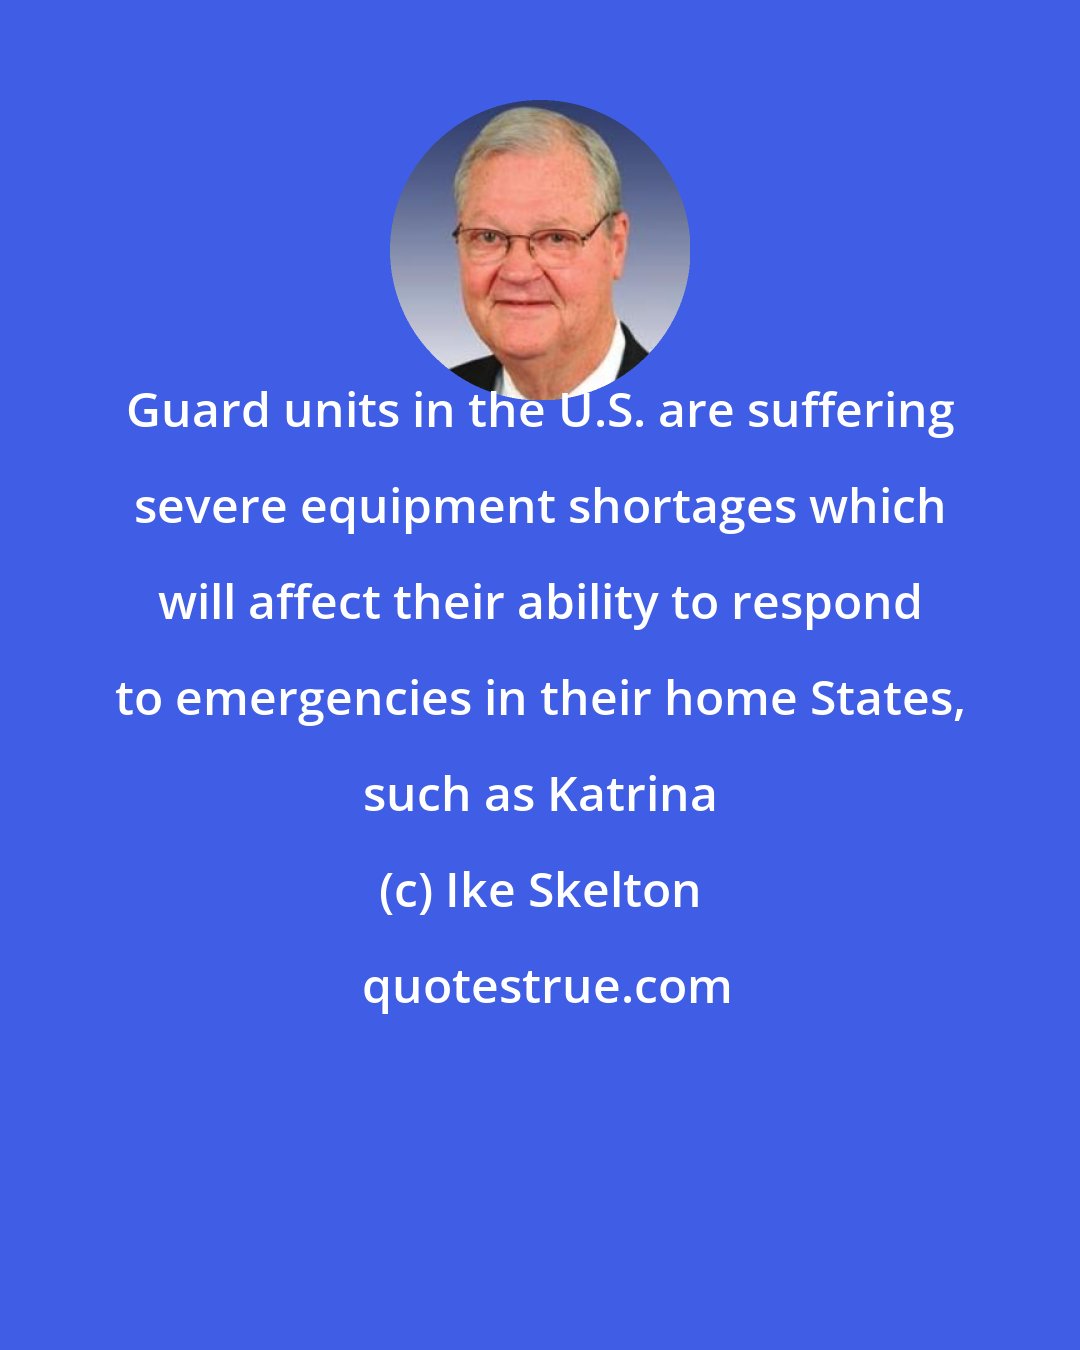 Ike Skelton: Guard units in the U.S. are suffering severe equipment shortages which will affect their ability to respond to emergencies in their home States, such as Katrina